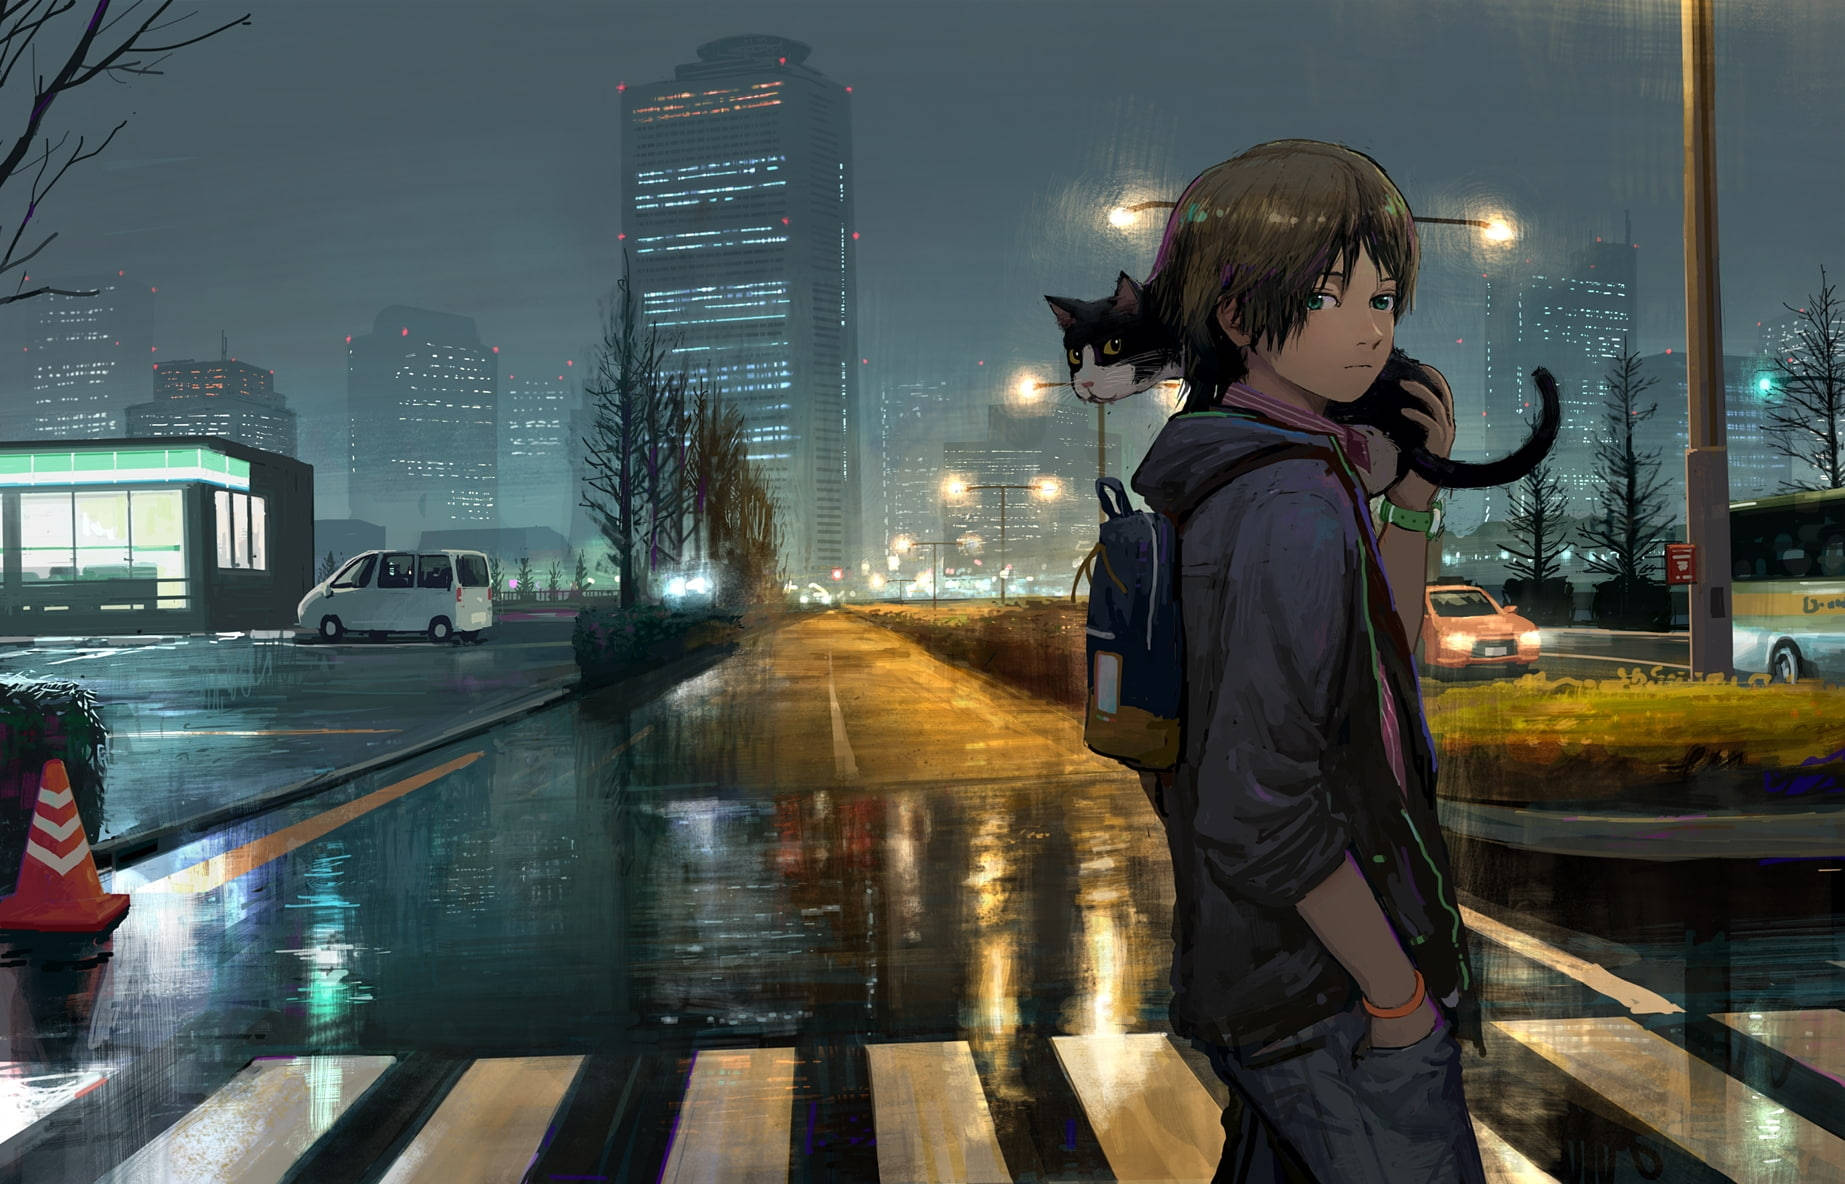 Cute Anime Boy Carrying A Cat In The Streets Background